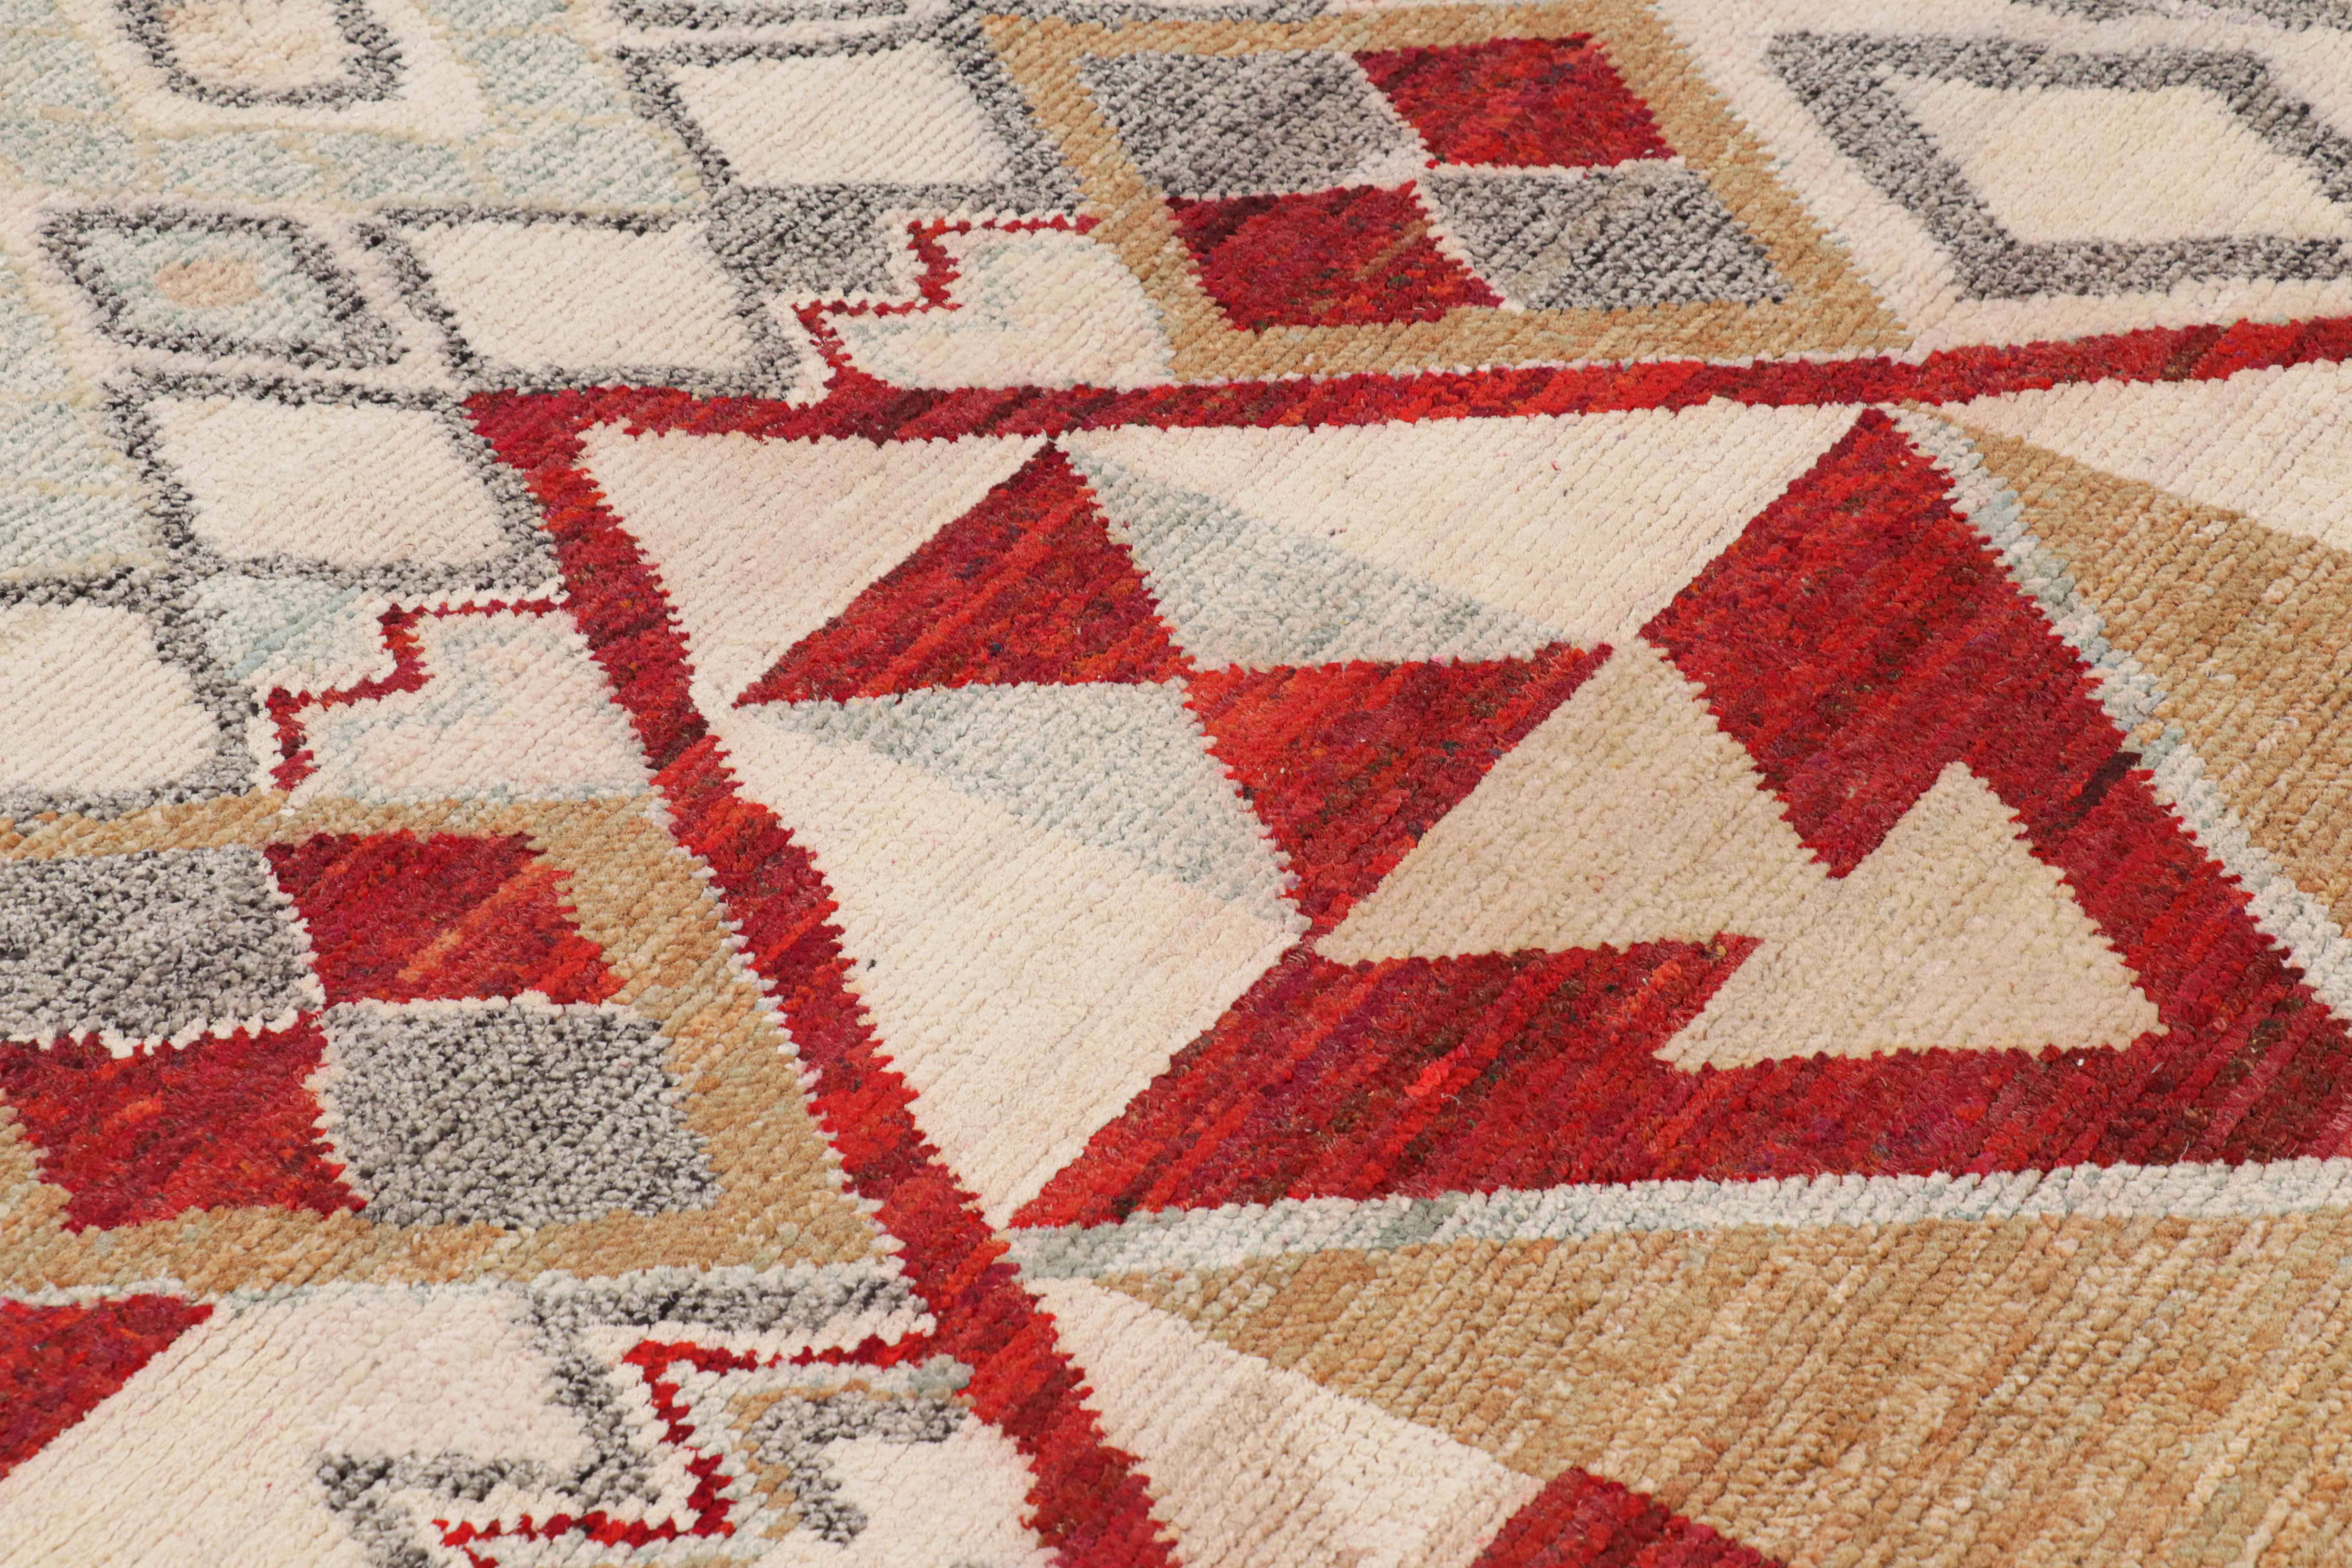 Hand-knotted in silk, this 5x7 contemporary Moroccan style rug features a ribbed texture and geometric patterns inspired by the primitivist Berber weaving traditions. 

On the Design: 

Connoisseurs may admire the subtle appeal of the rug that comes